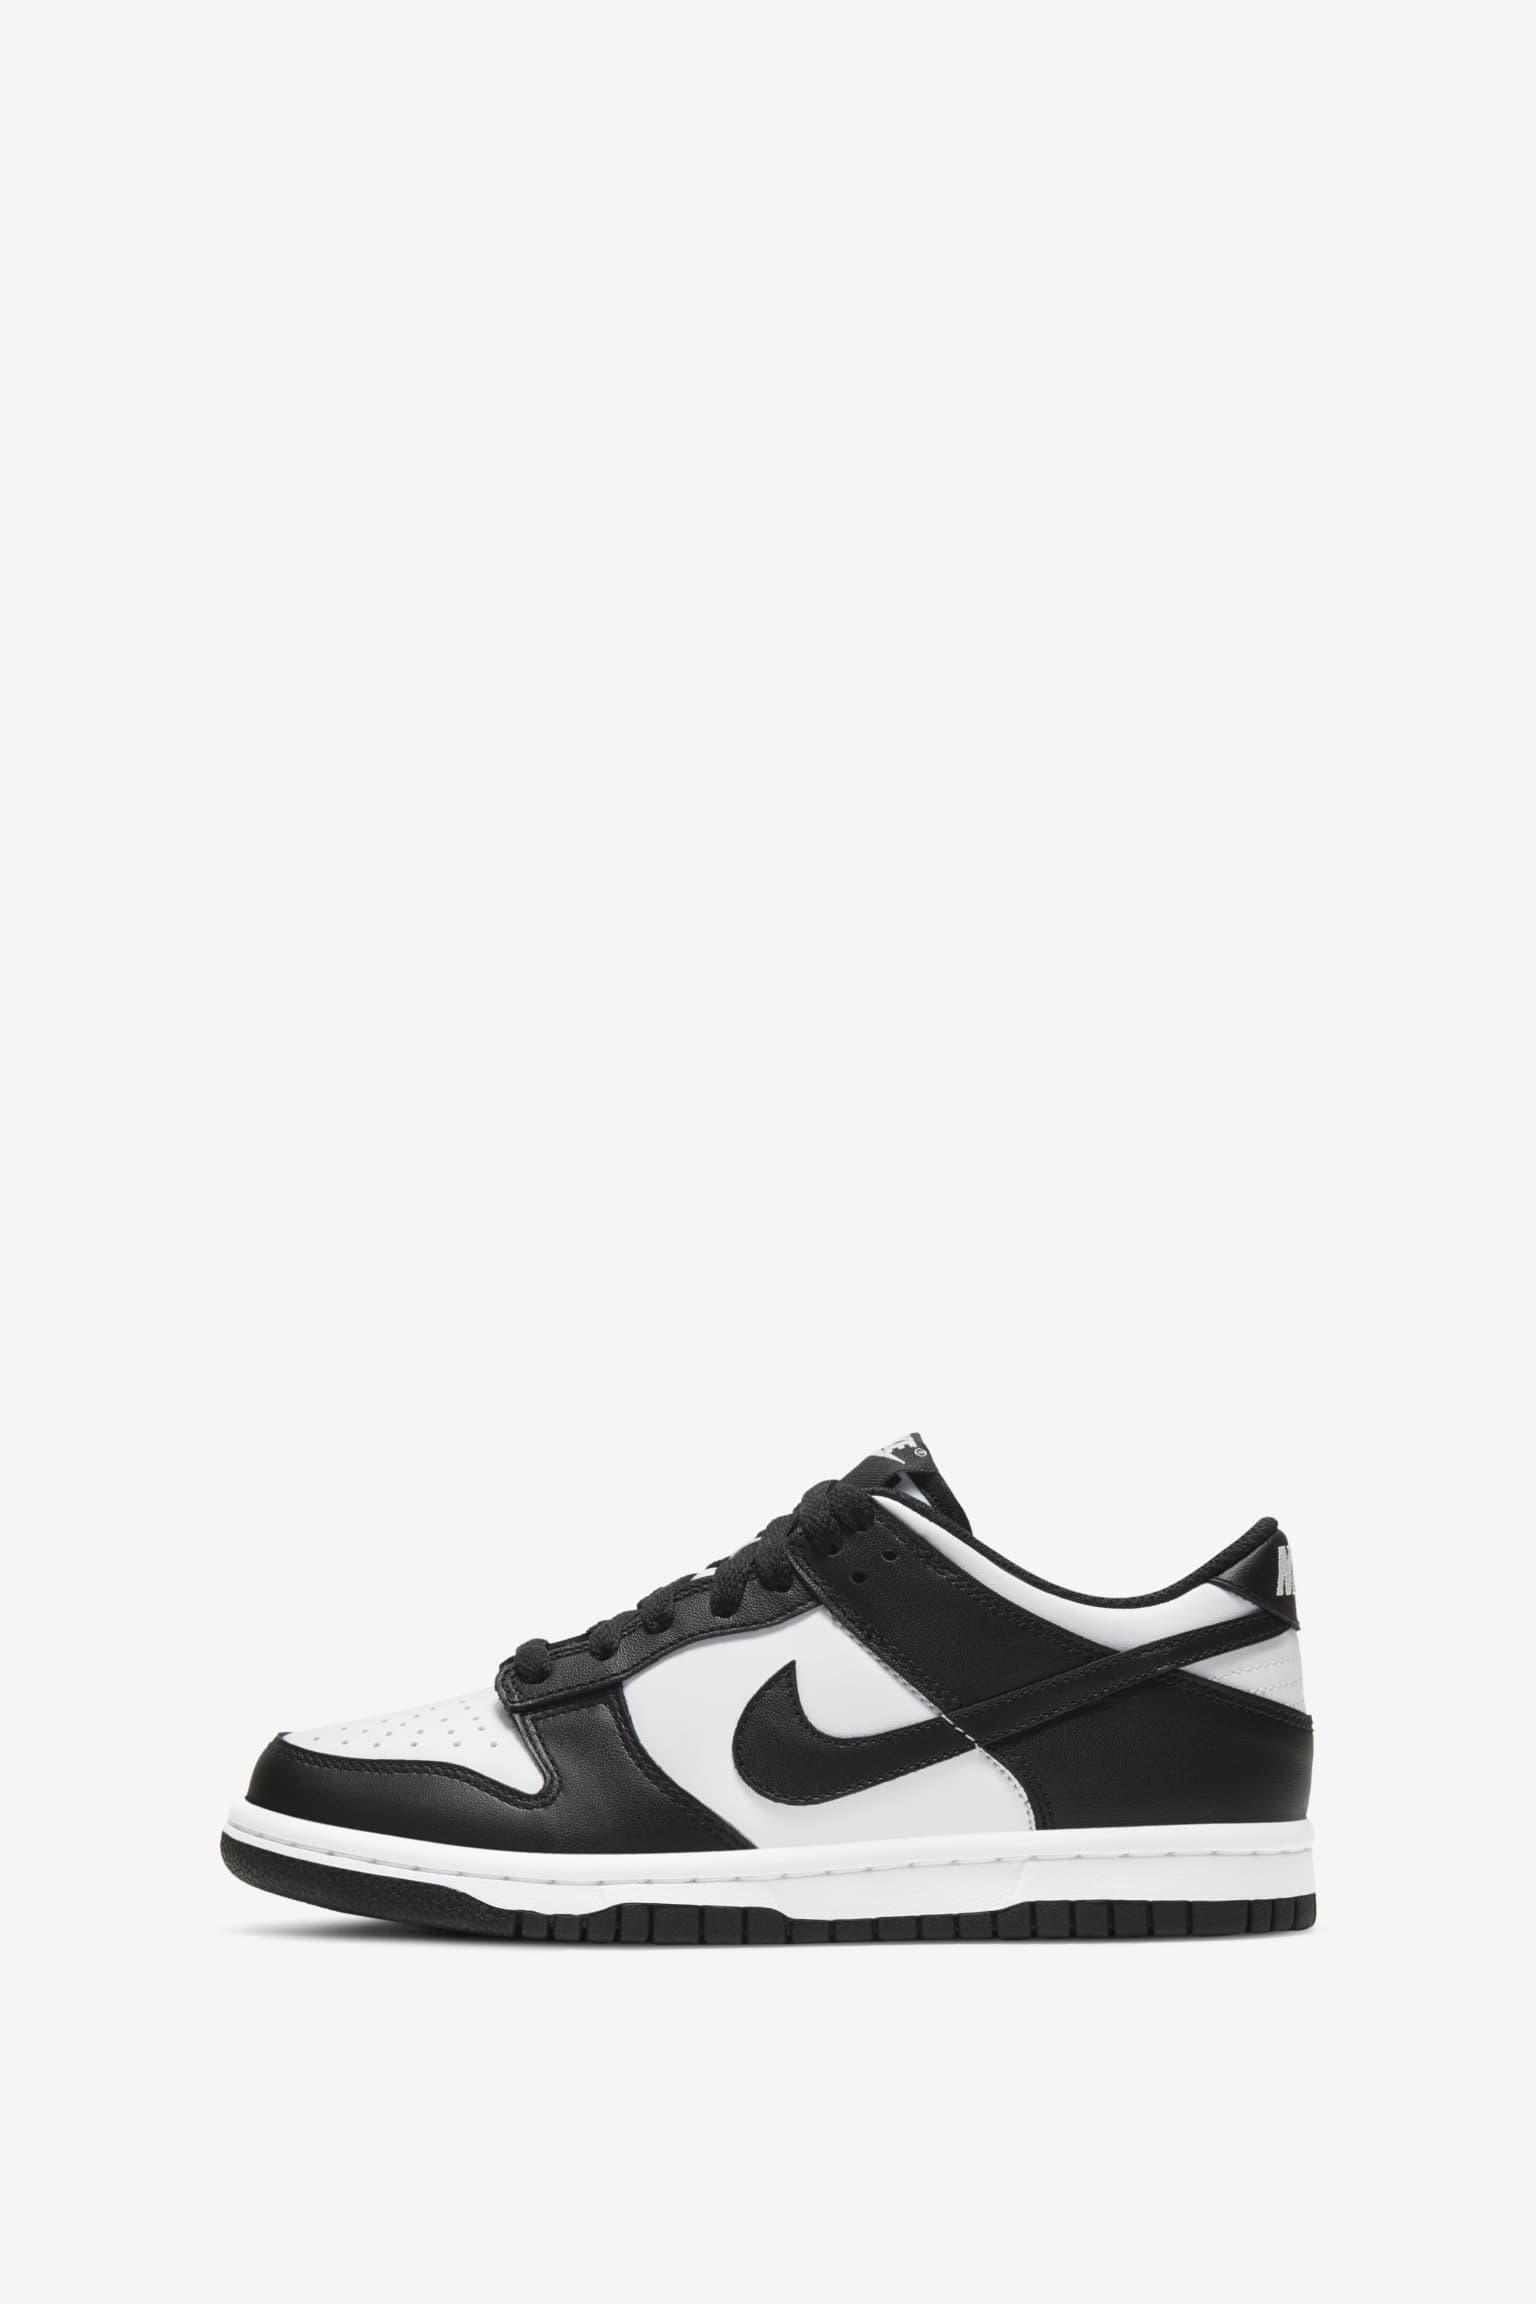 nike dunk low black and white